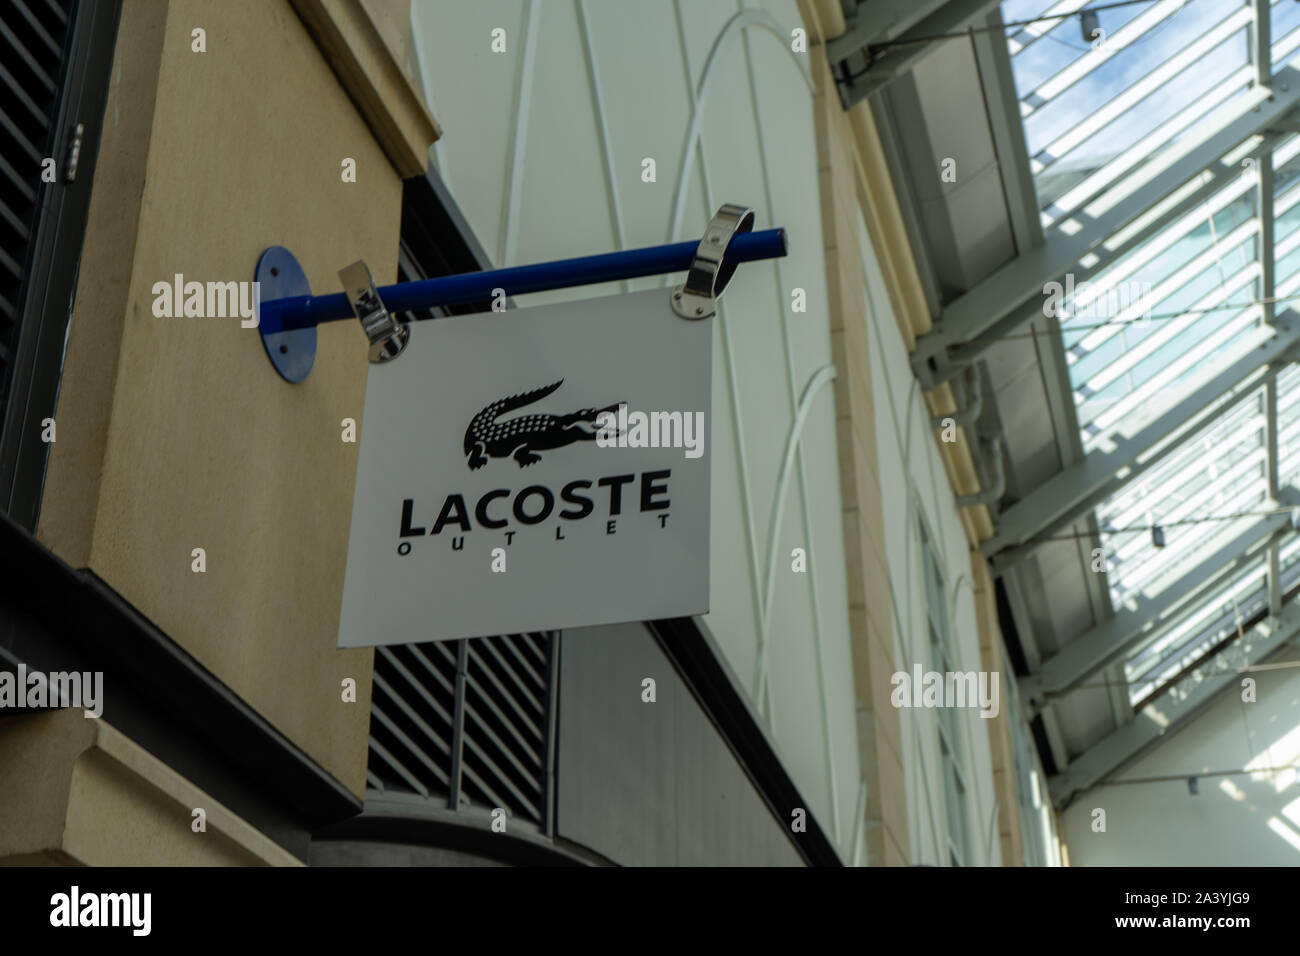 A Lacoste store sign hanging in a shopping mall Stock Photo